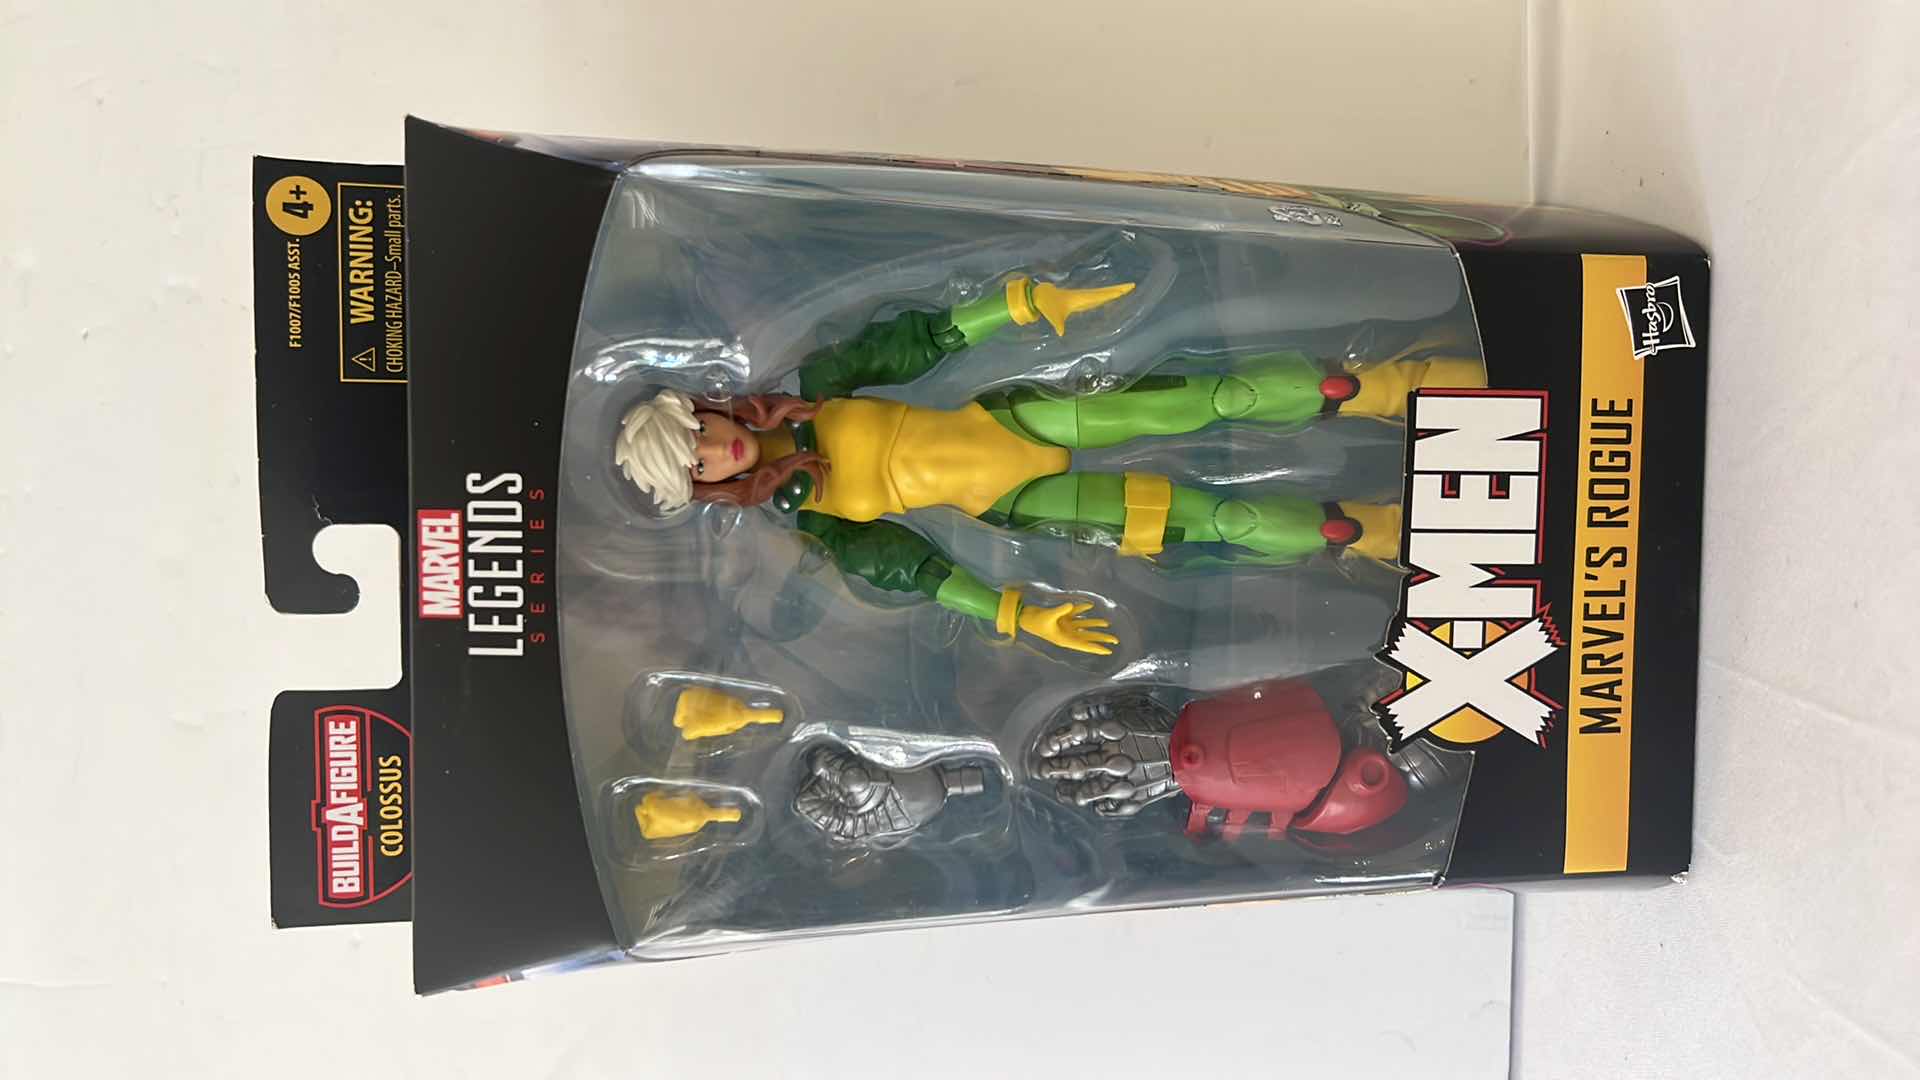 Photo 1 of BRAND NEW MARVEL X-MEN “MARVEL’S ROGUE” ACTION FIGURE